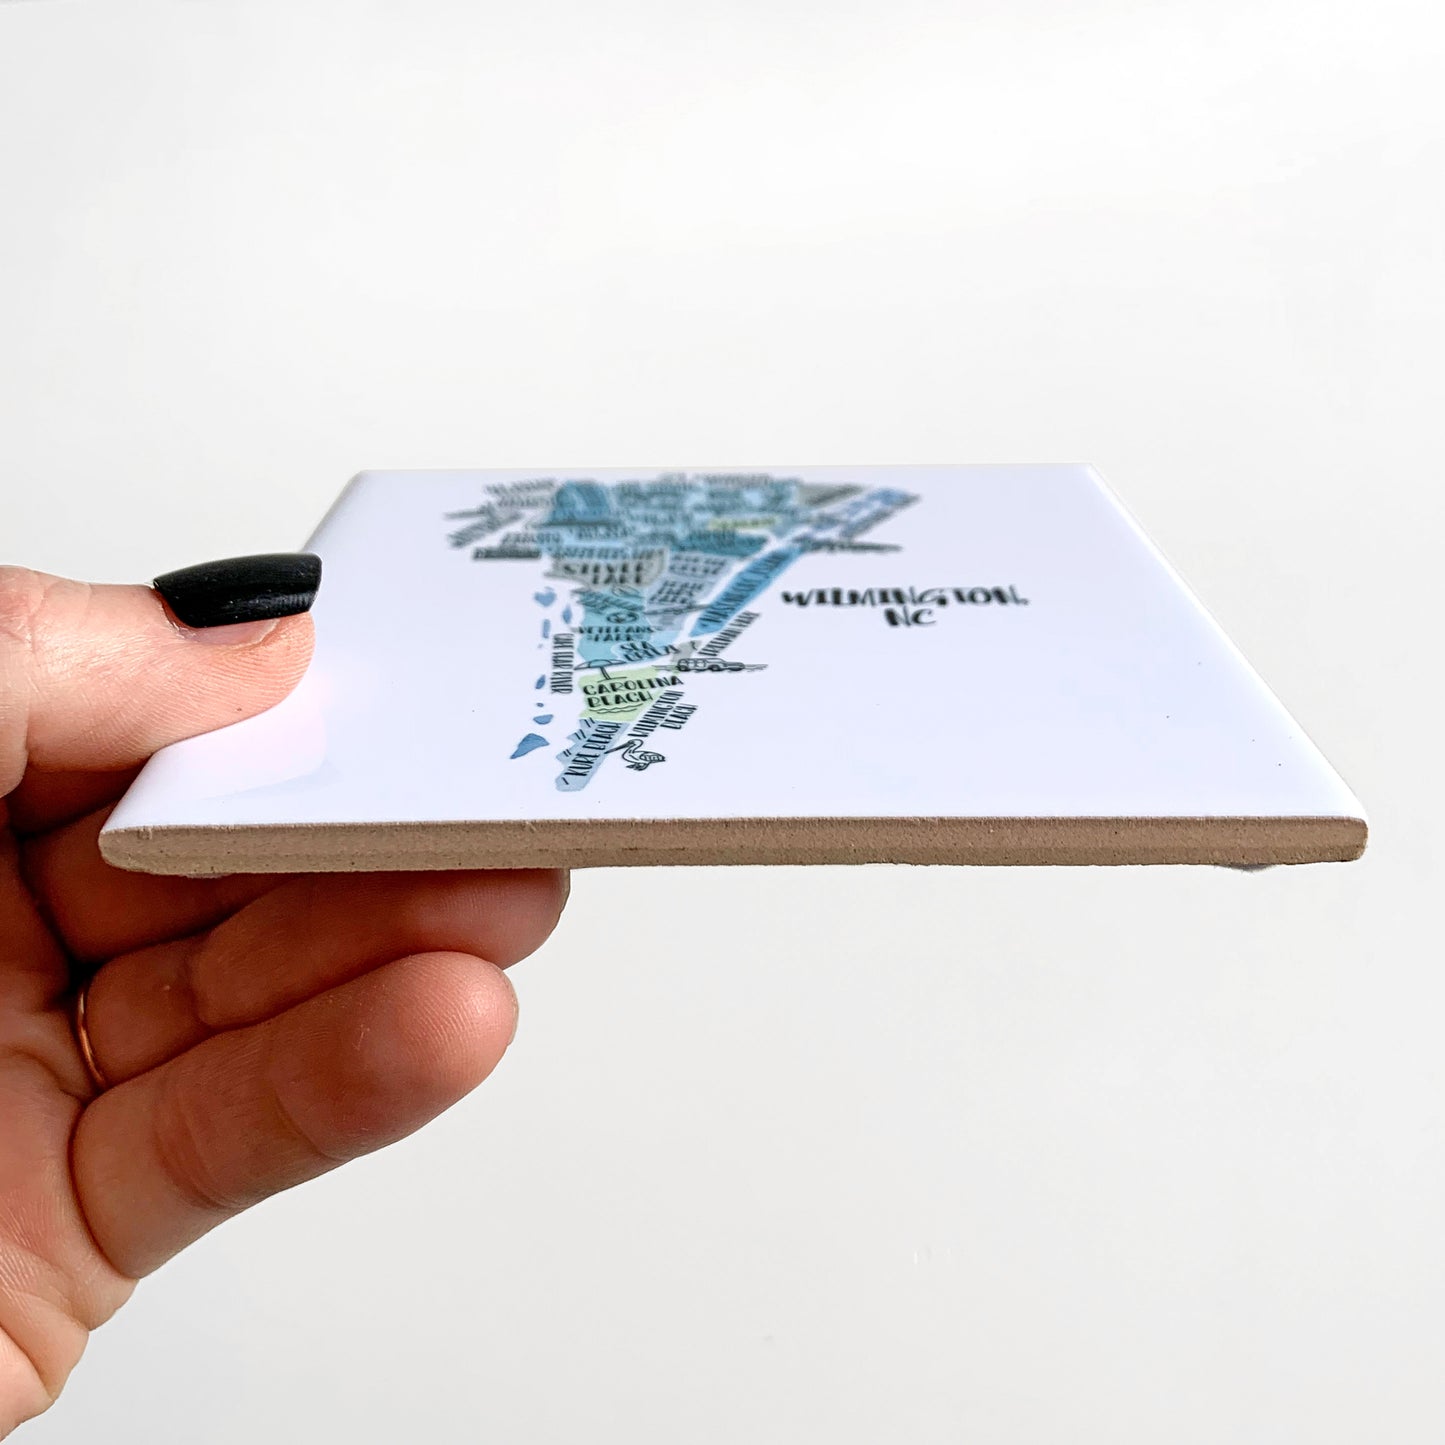 A hand holding a ceramic coaster with a hand-drawn map on it, showing the tile edges